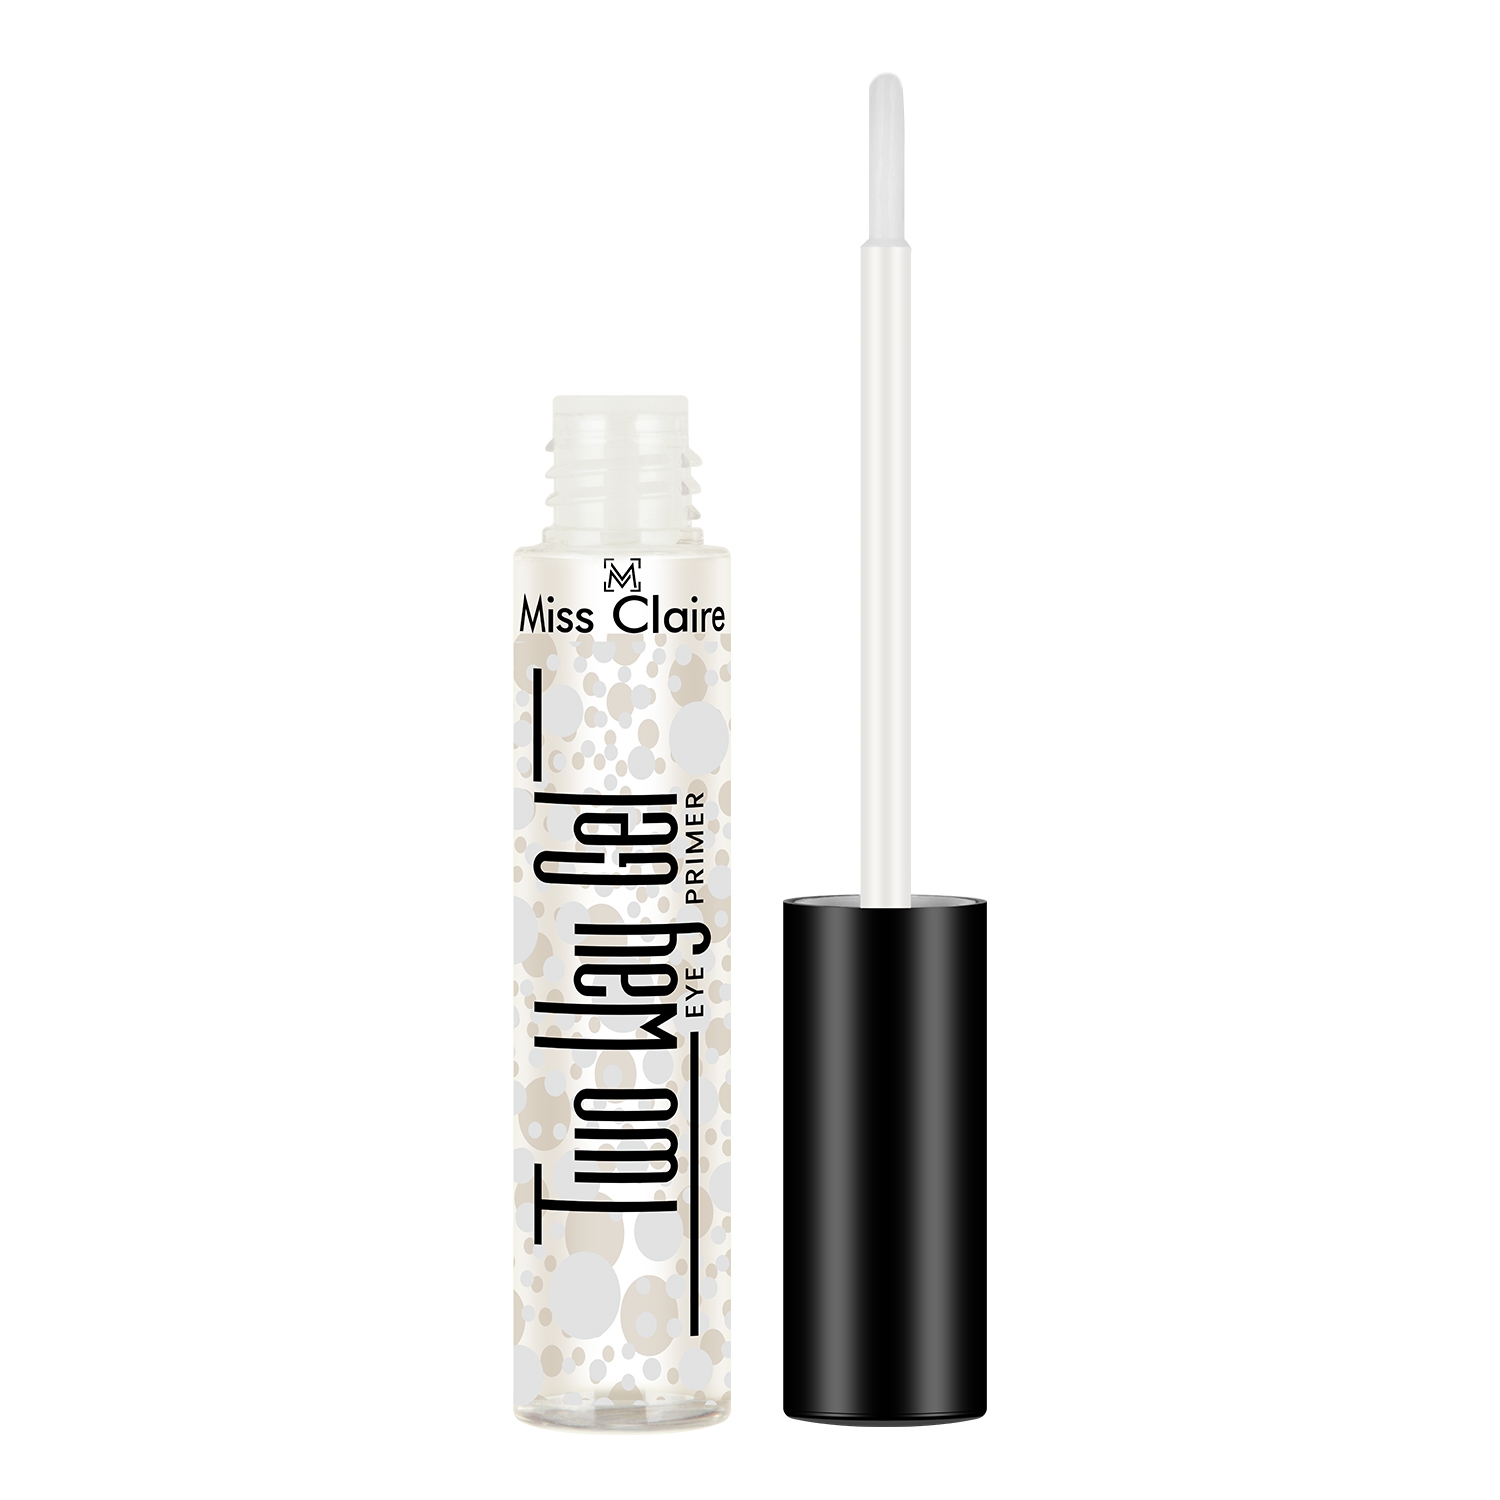 Miss Claire | Miss Claire Two Way Gel Eye Primer - (8ml)